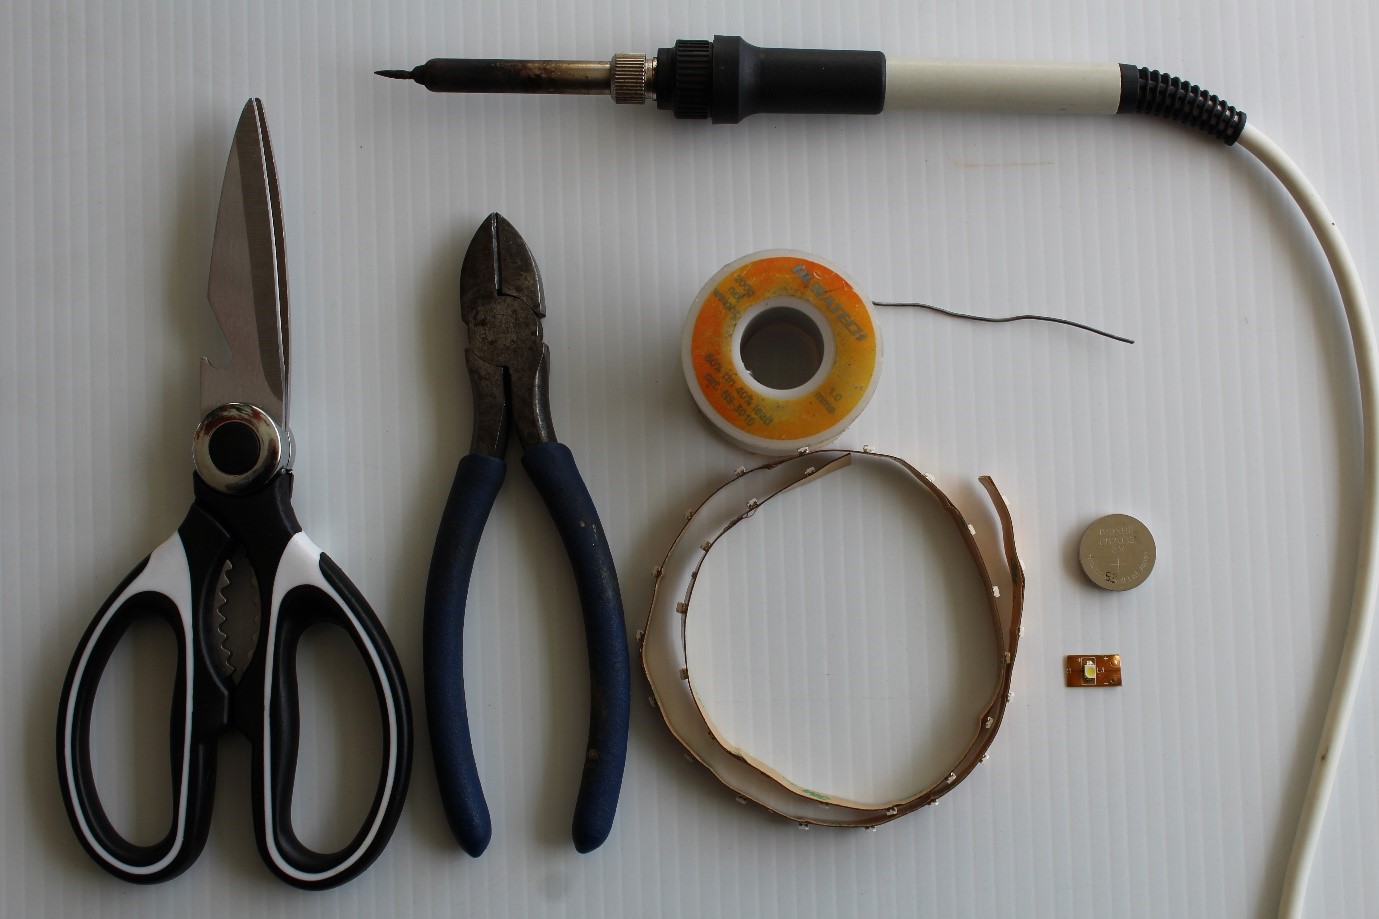 IMAGE: Basic tools required. LTR: Scissors, side cutter, solder, copper tape, battery (3 volts), LED (light). Switch & microcontroller (Picaxe) – not shown.